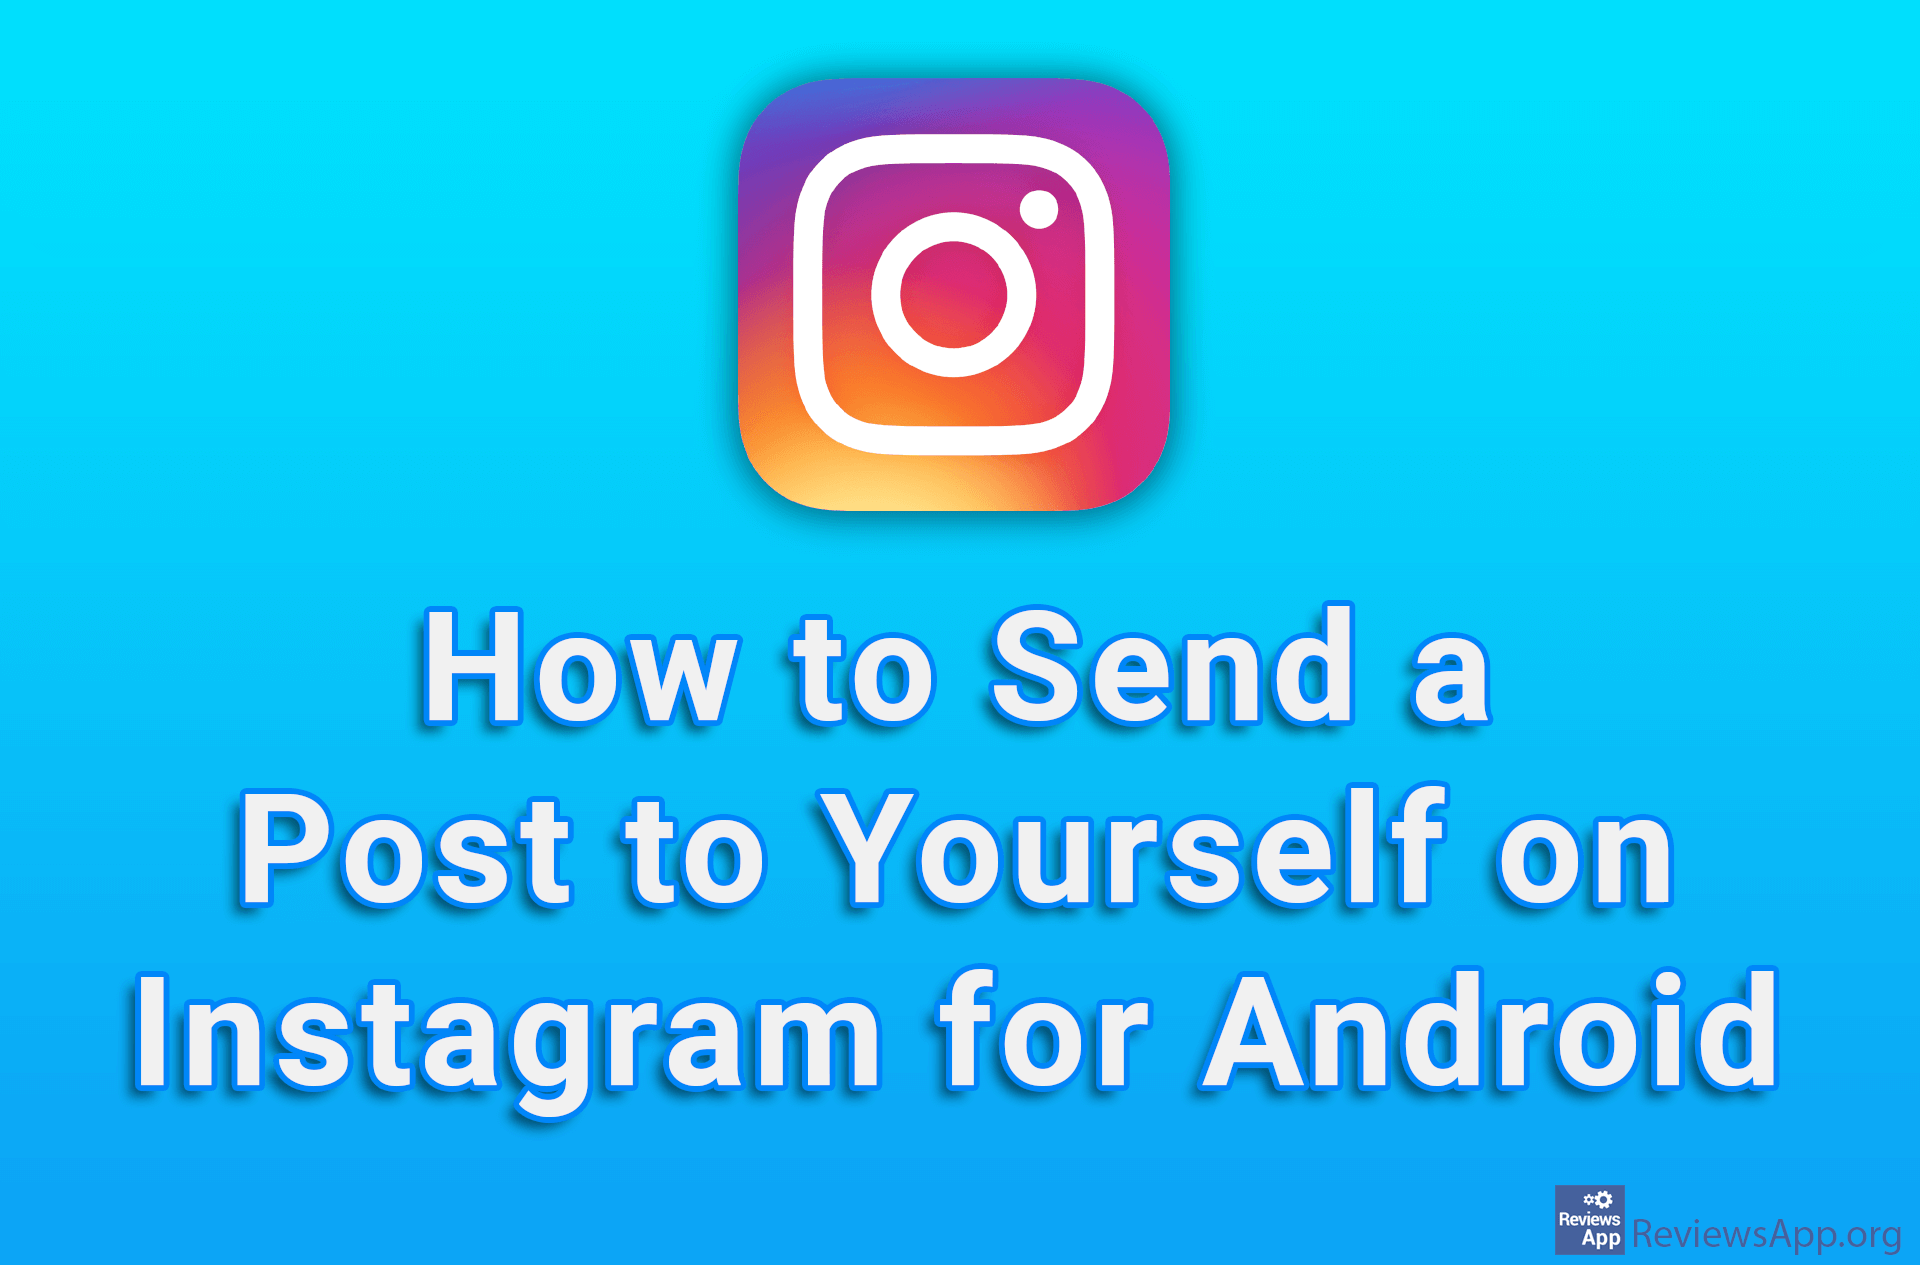 How to Send a Post to Yourself on Instagram for Android